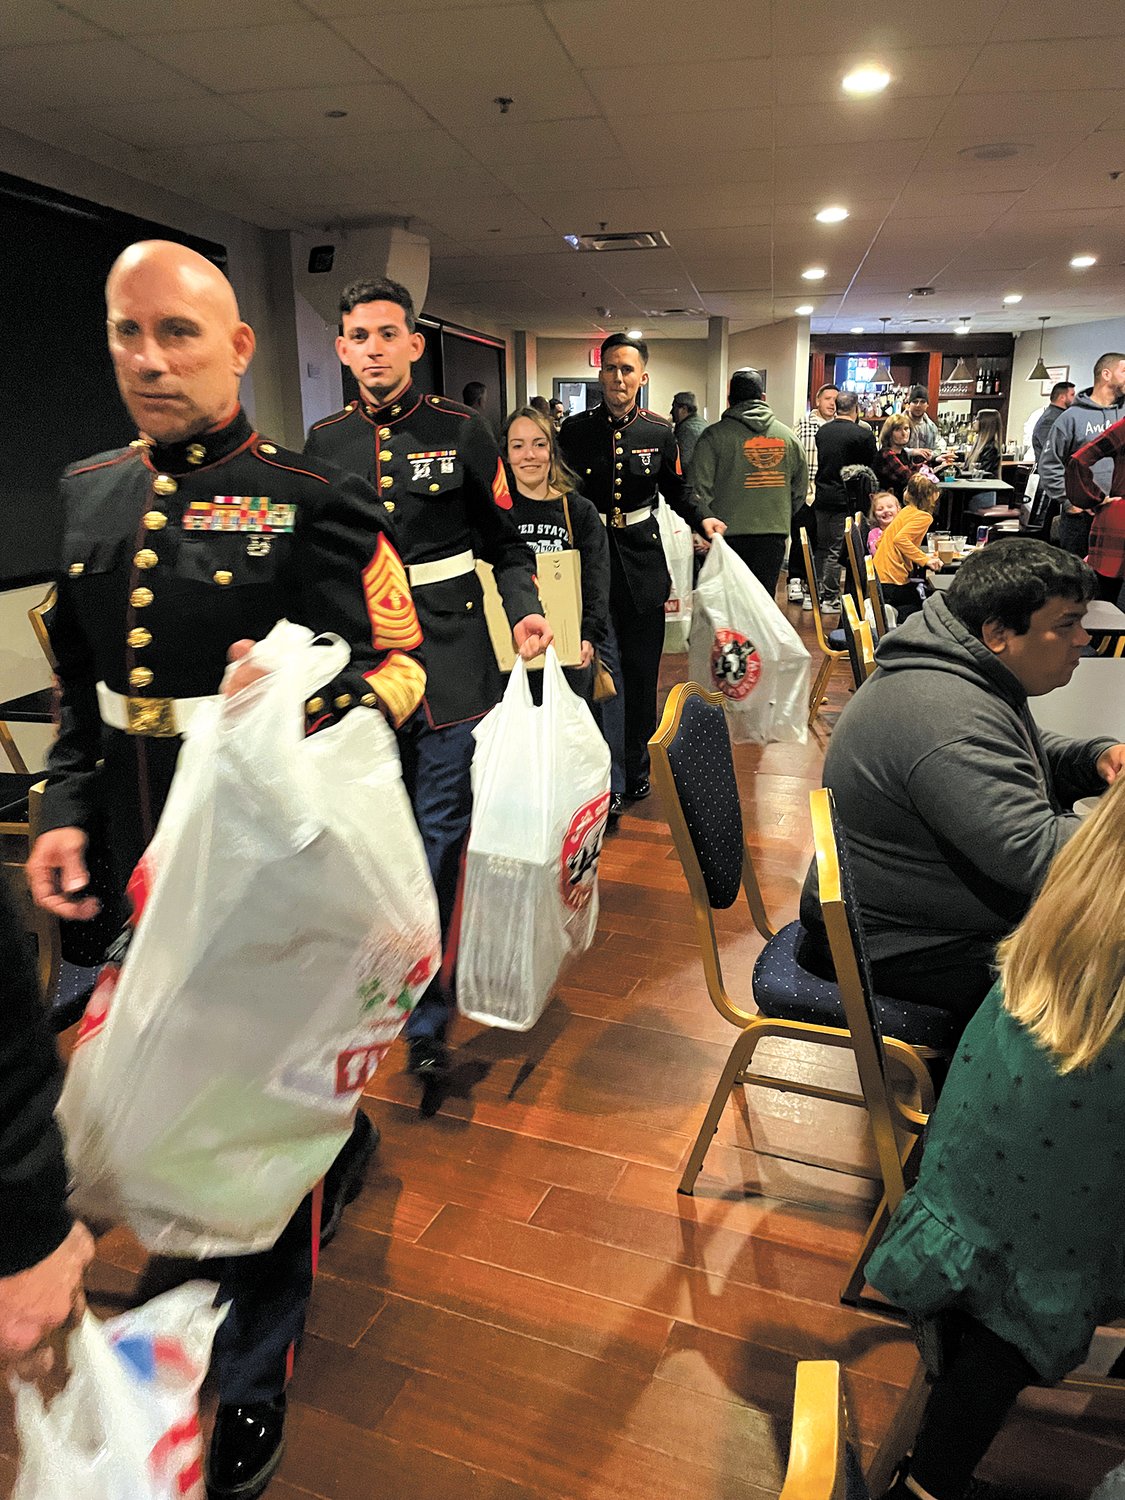 THE TOYS KEPT COMING: Members of the Marine Corp help deliver toys for Cranston kids.